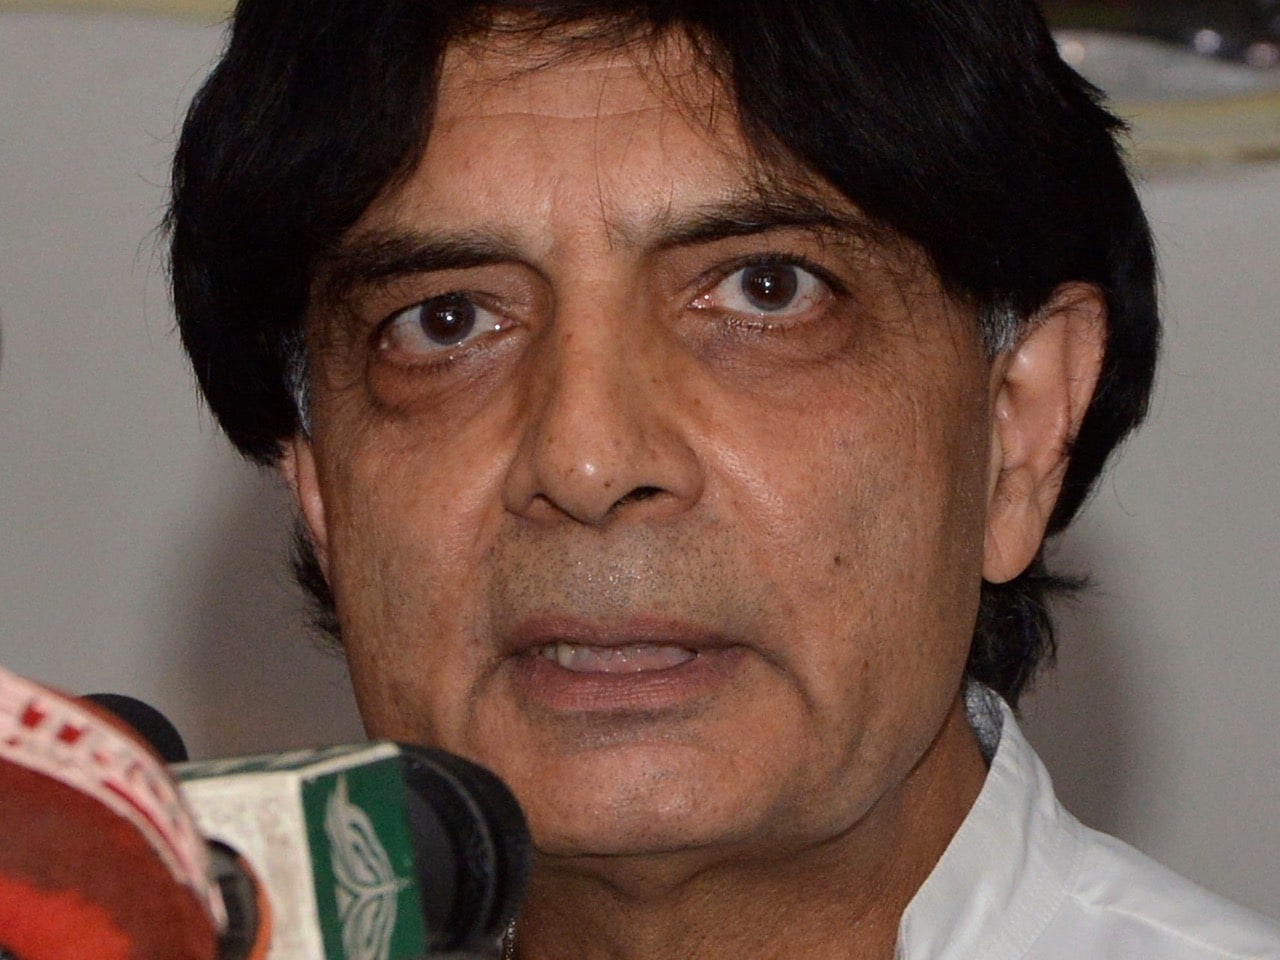 Pakistan's Interior Minister Chaudhry Nisar Ali Khan addresses a news conference in Islamabad, 13 October 2016. Khan has confirmed authorities imposed a travel ban on journalist Cyril Almeida, AP Photo/B.K. Bangash